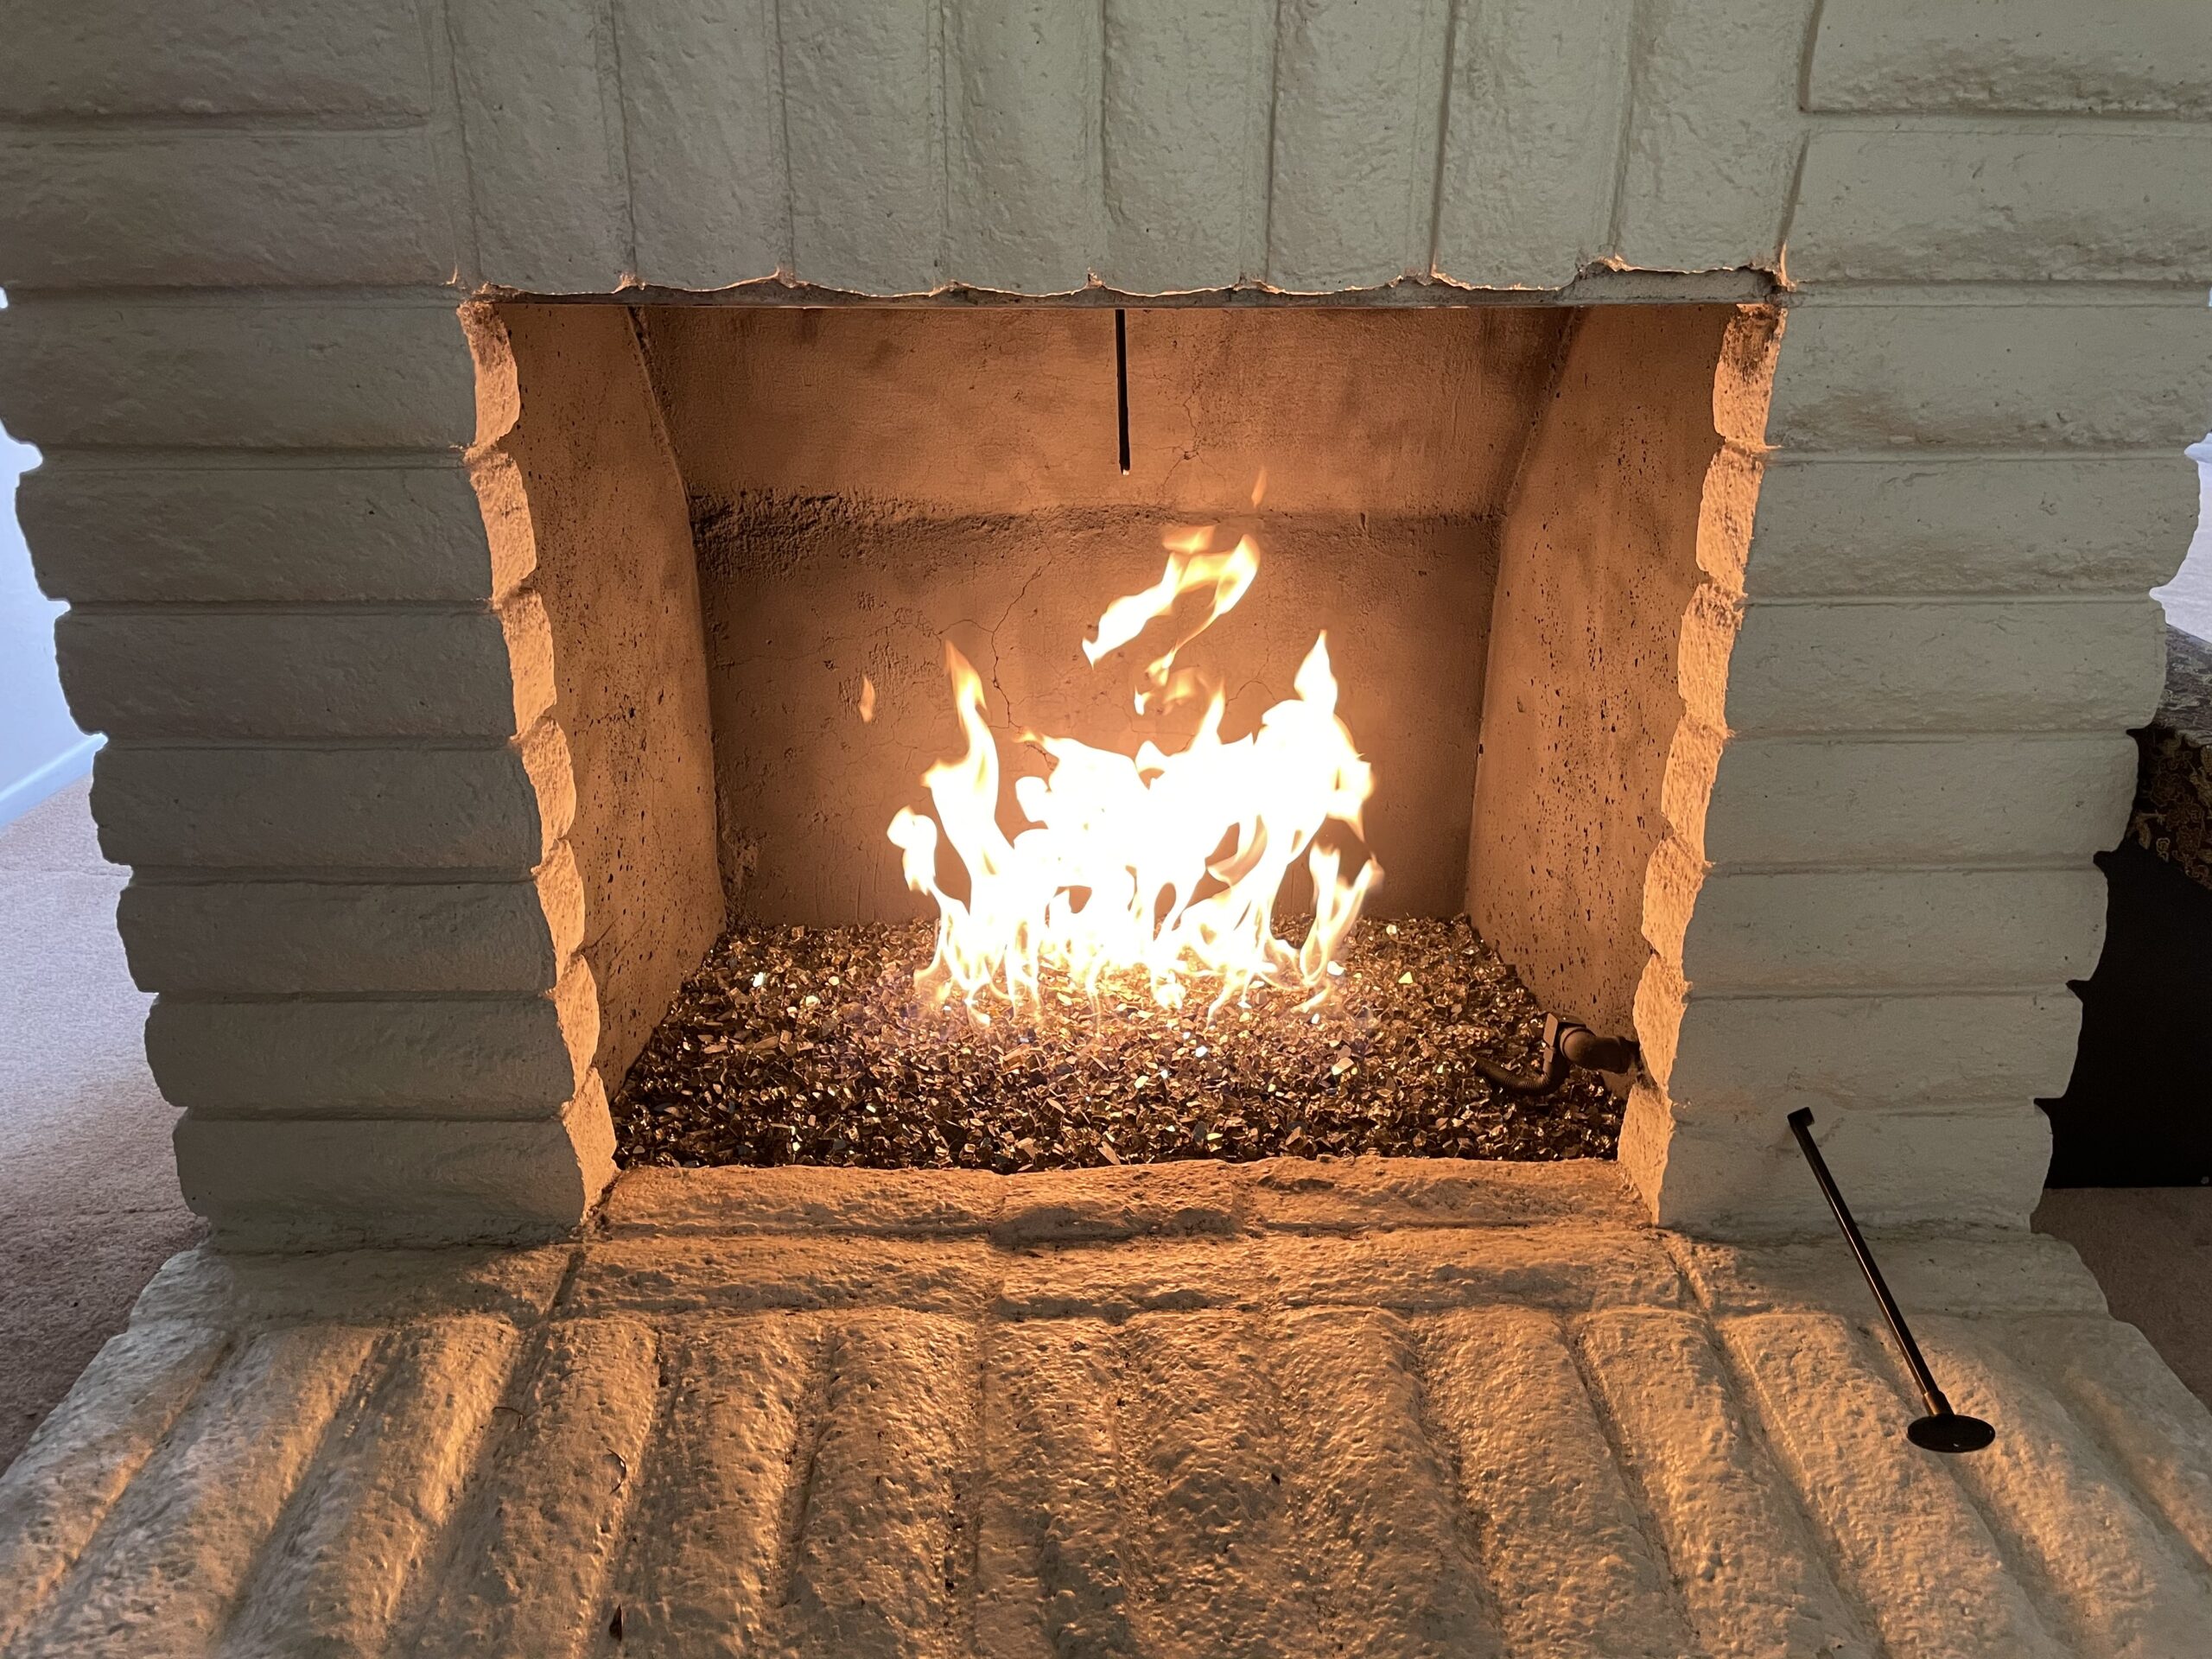 Glass Fire Rocks installed by A-1 Duct Cleaning & Chimney Sweep in Orange County, CA